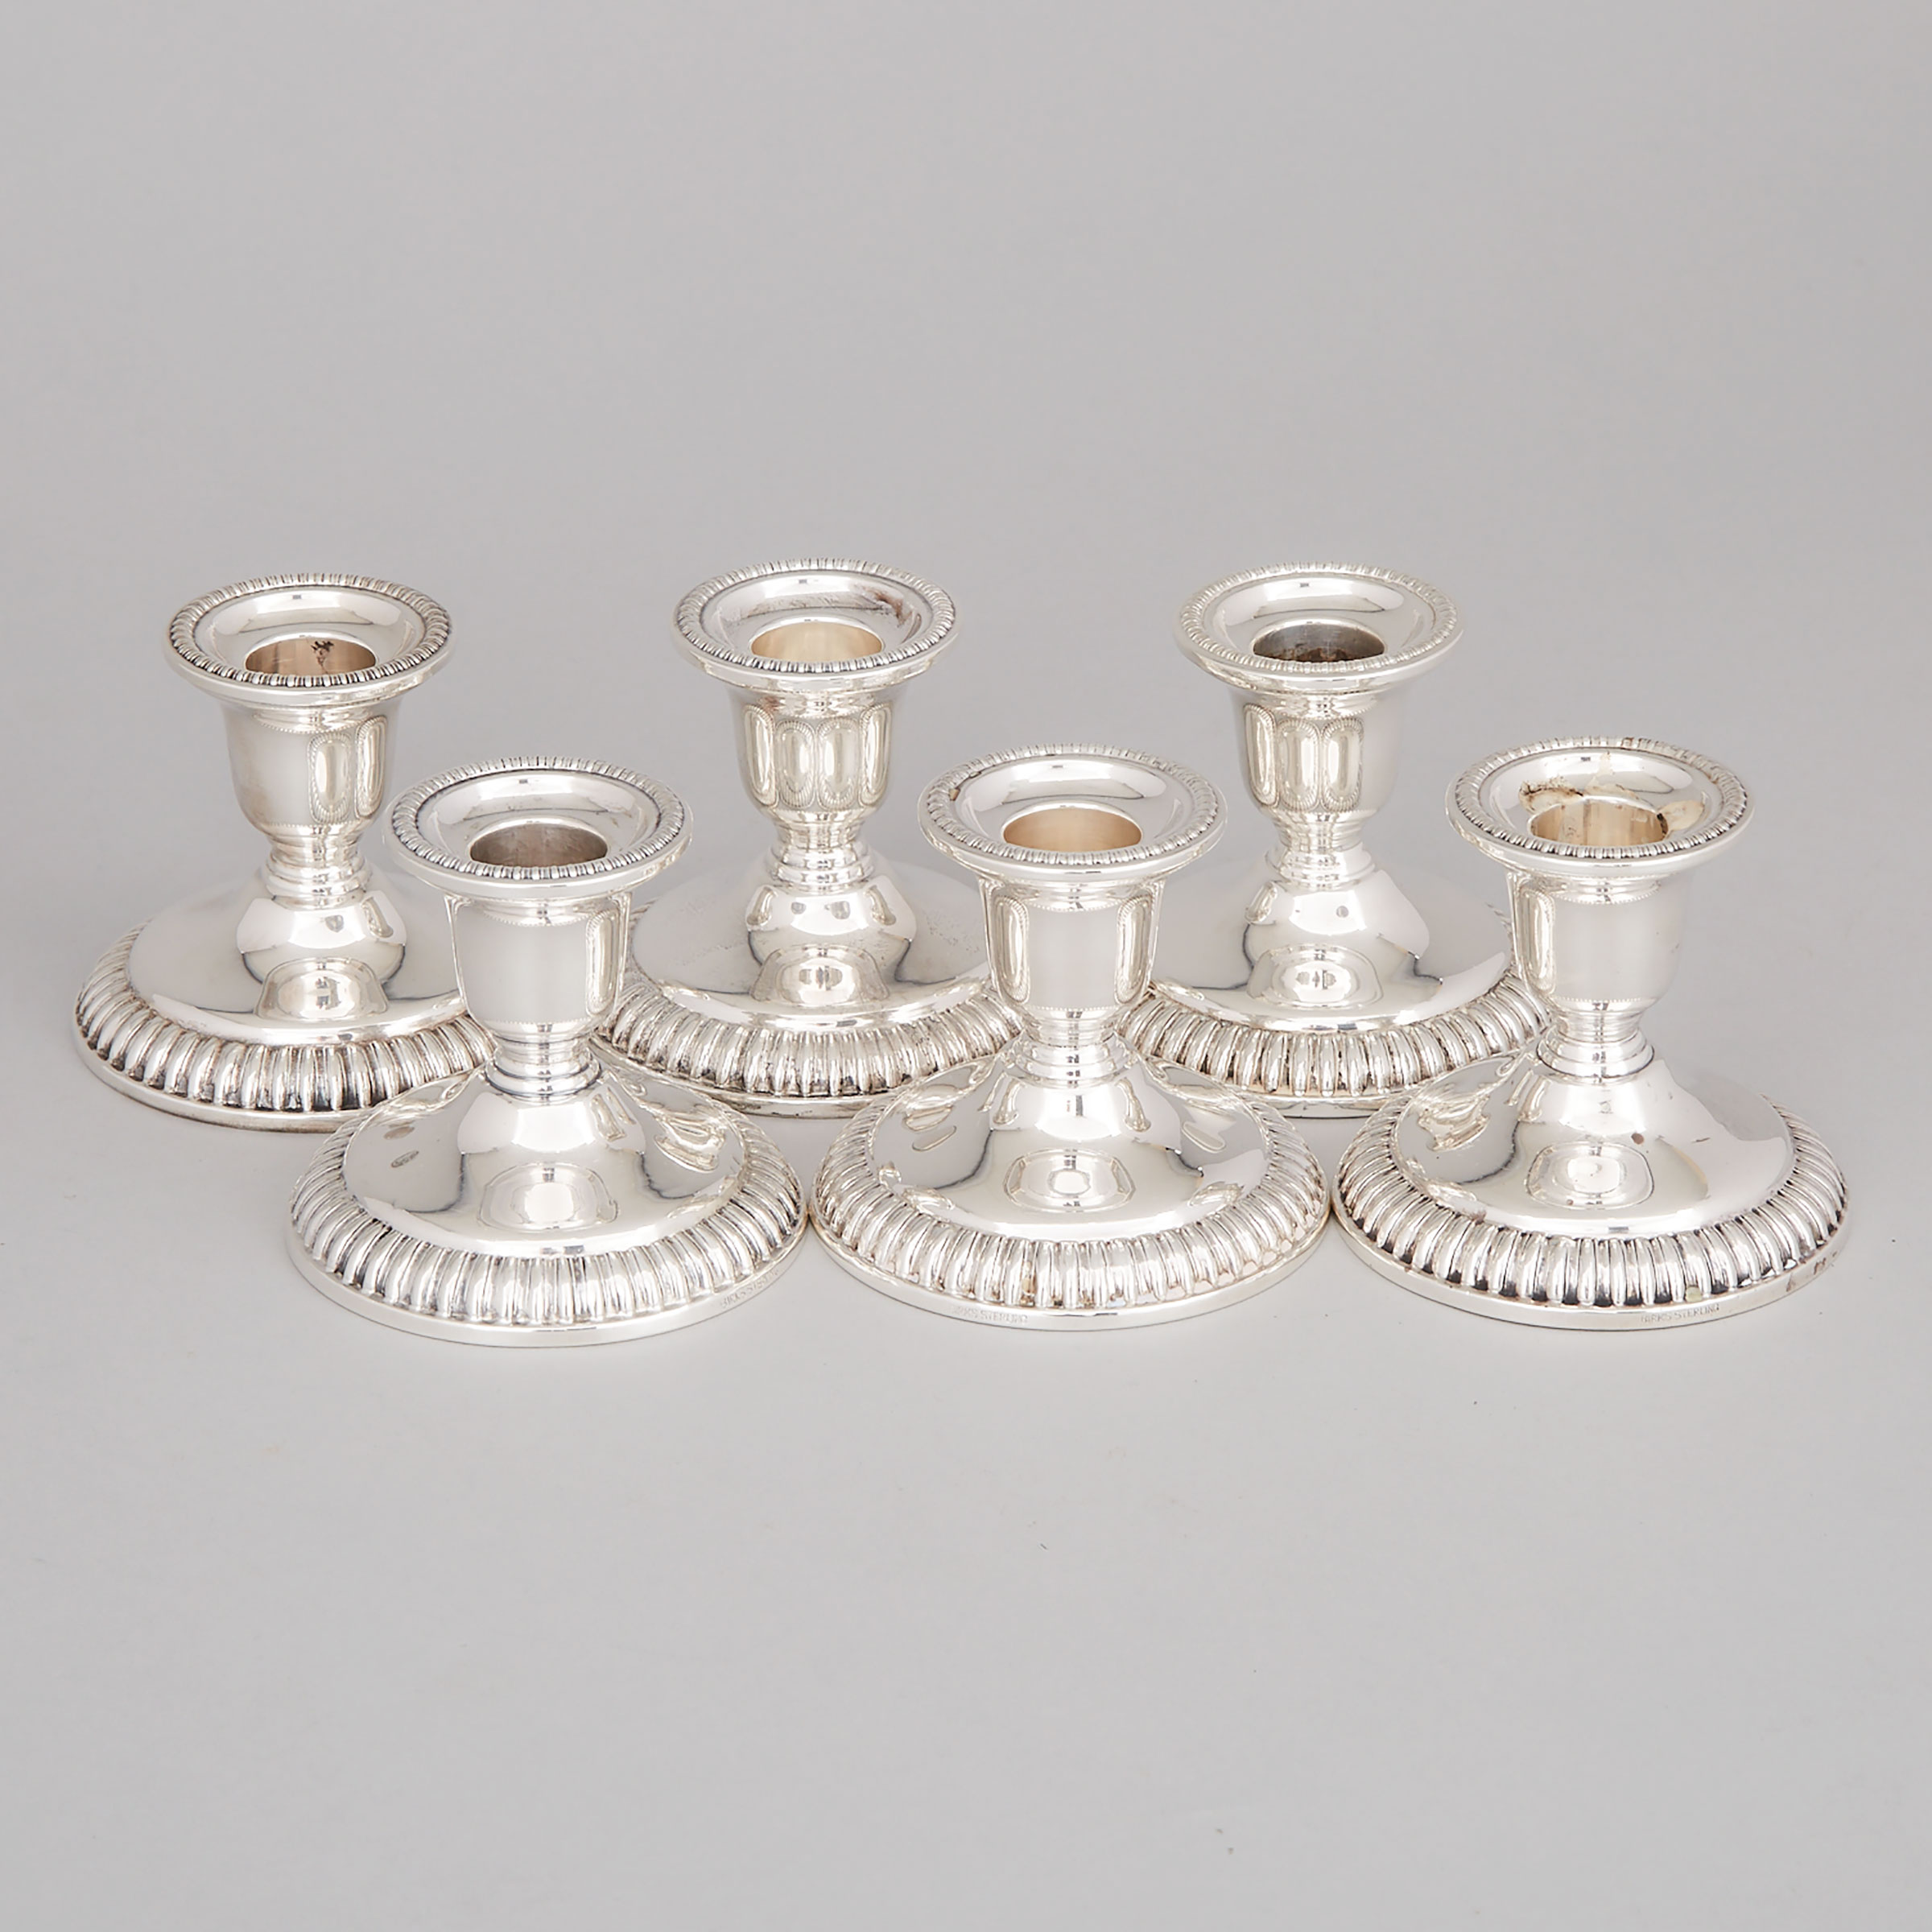 Six Canadian Silver Low Candlesticks, Henry Birks & Sons, Montreal, Que., 1904-24